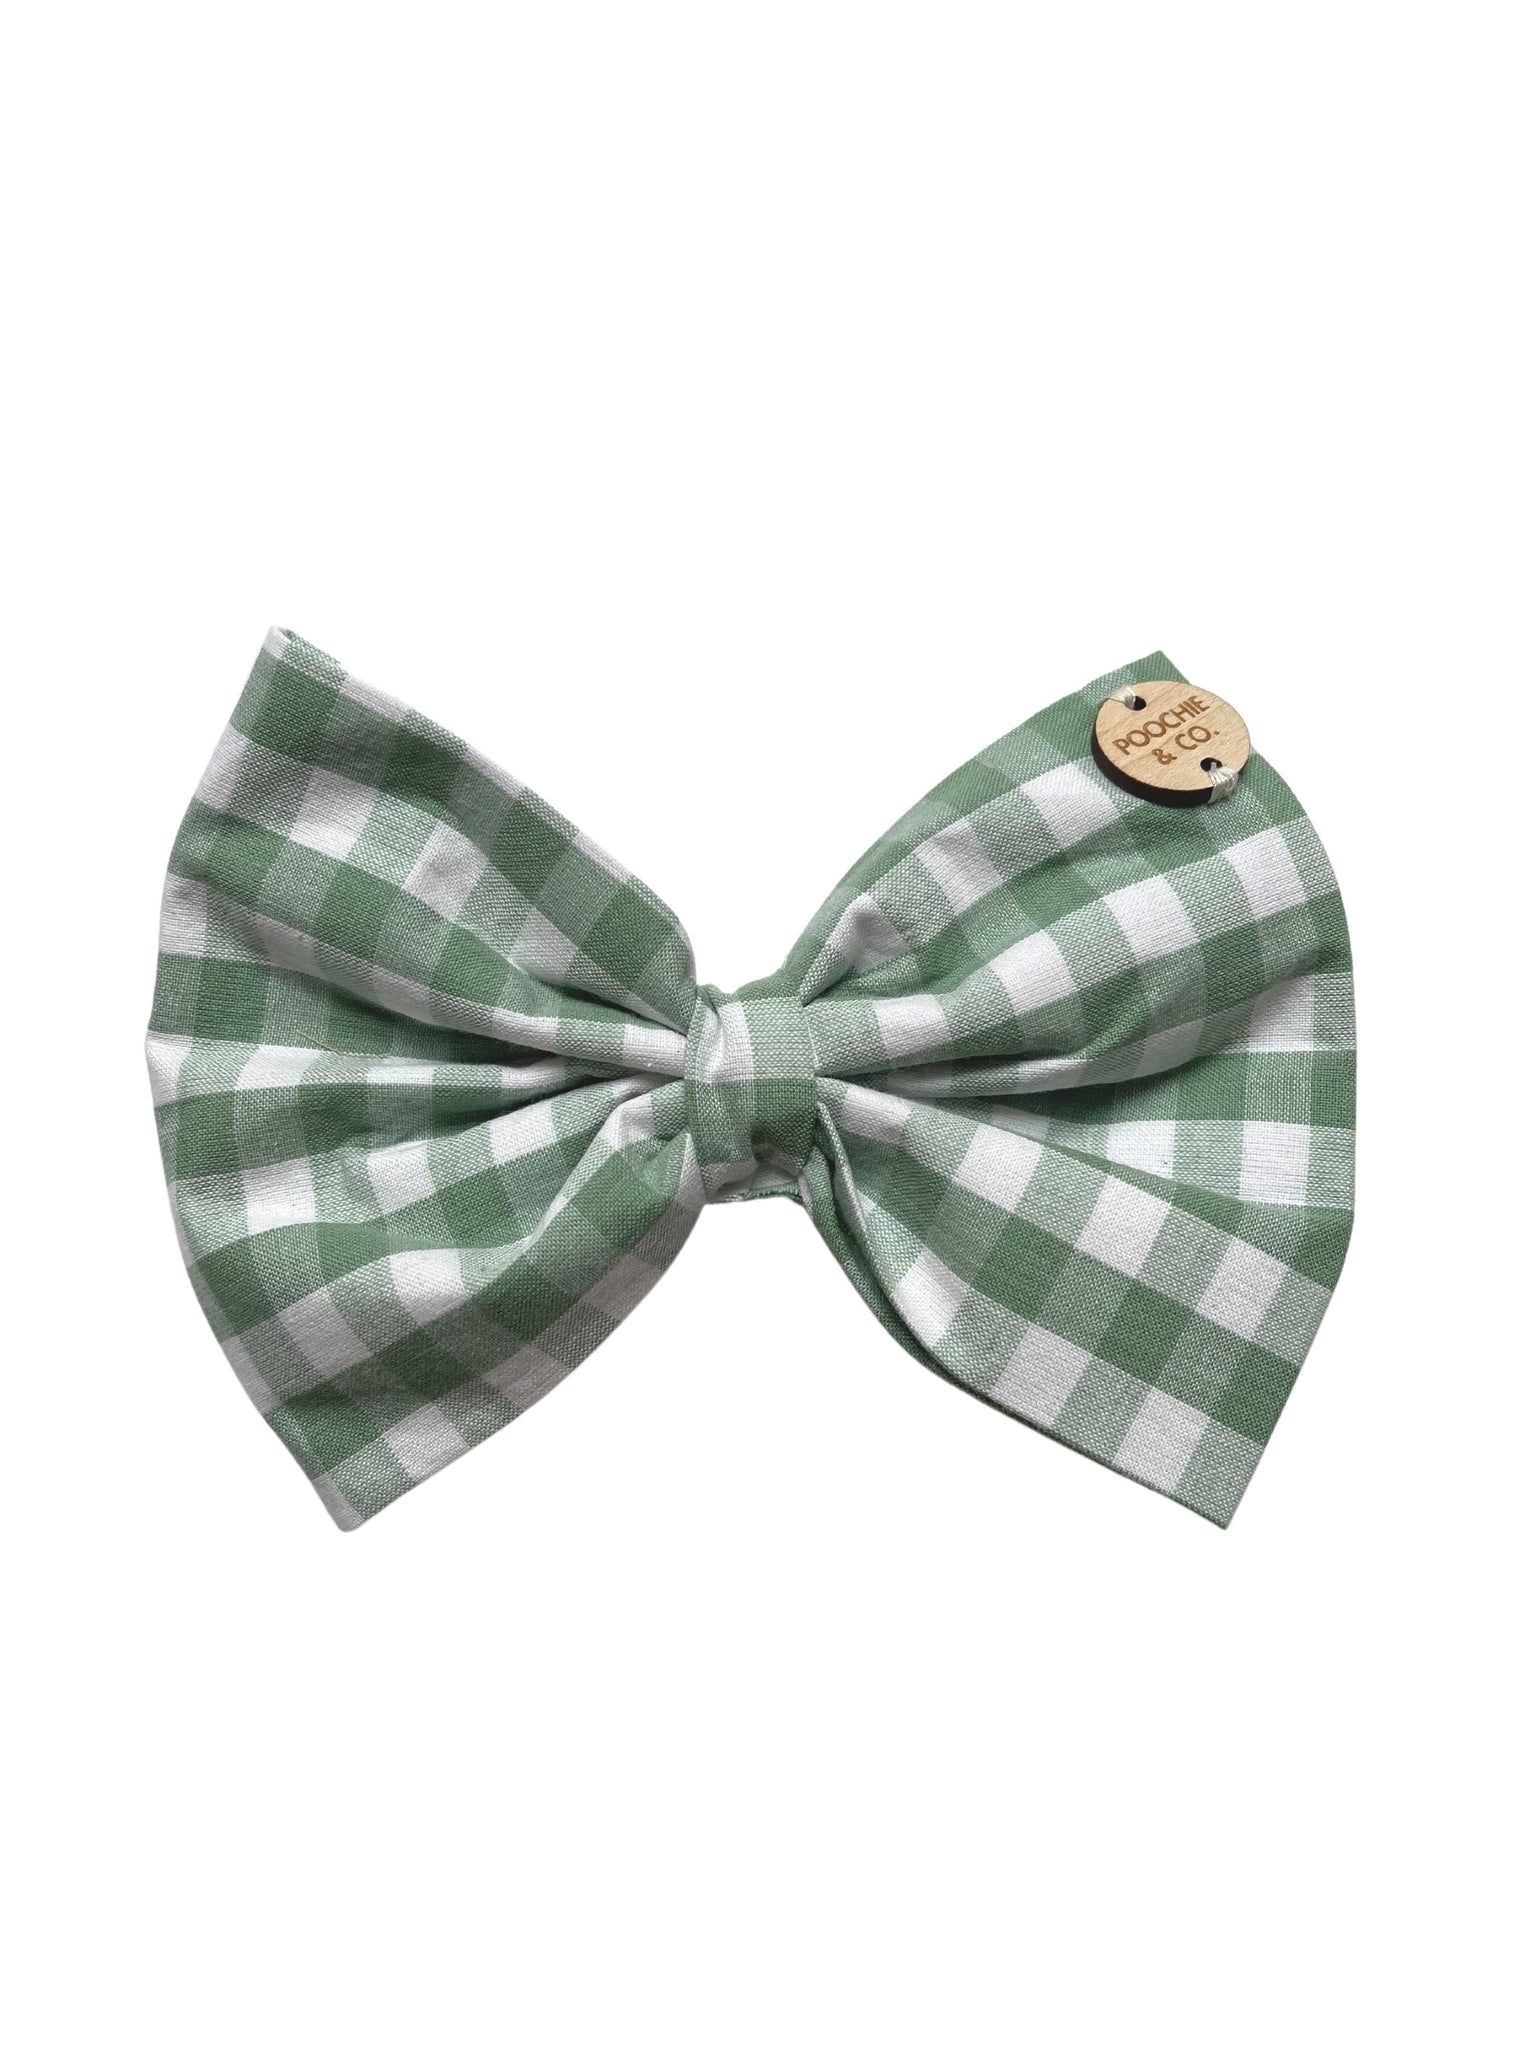 'Green Gingham' Bow Ties